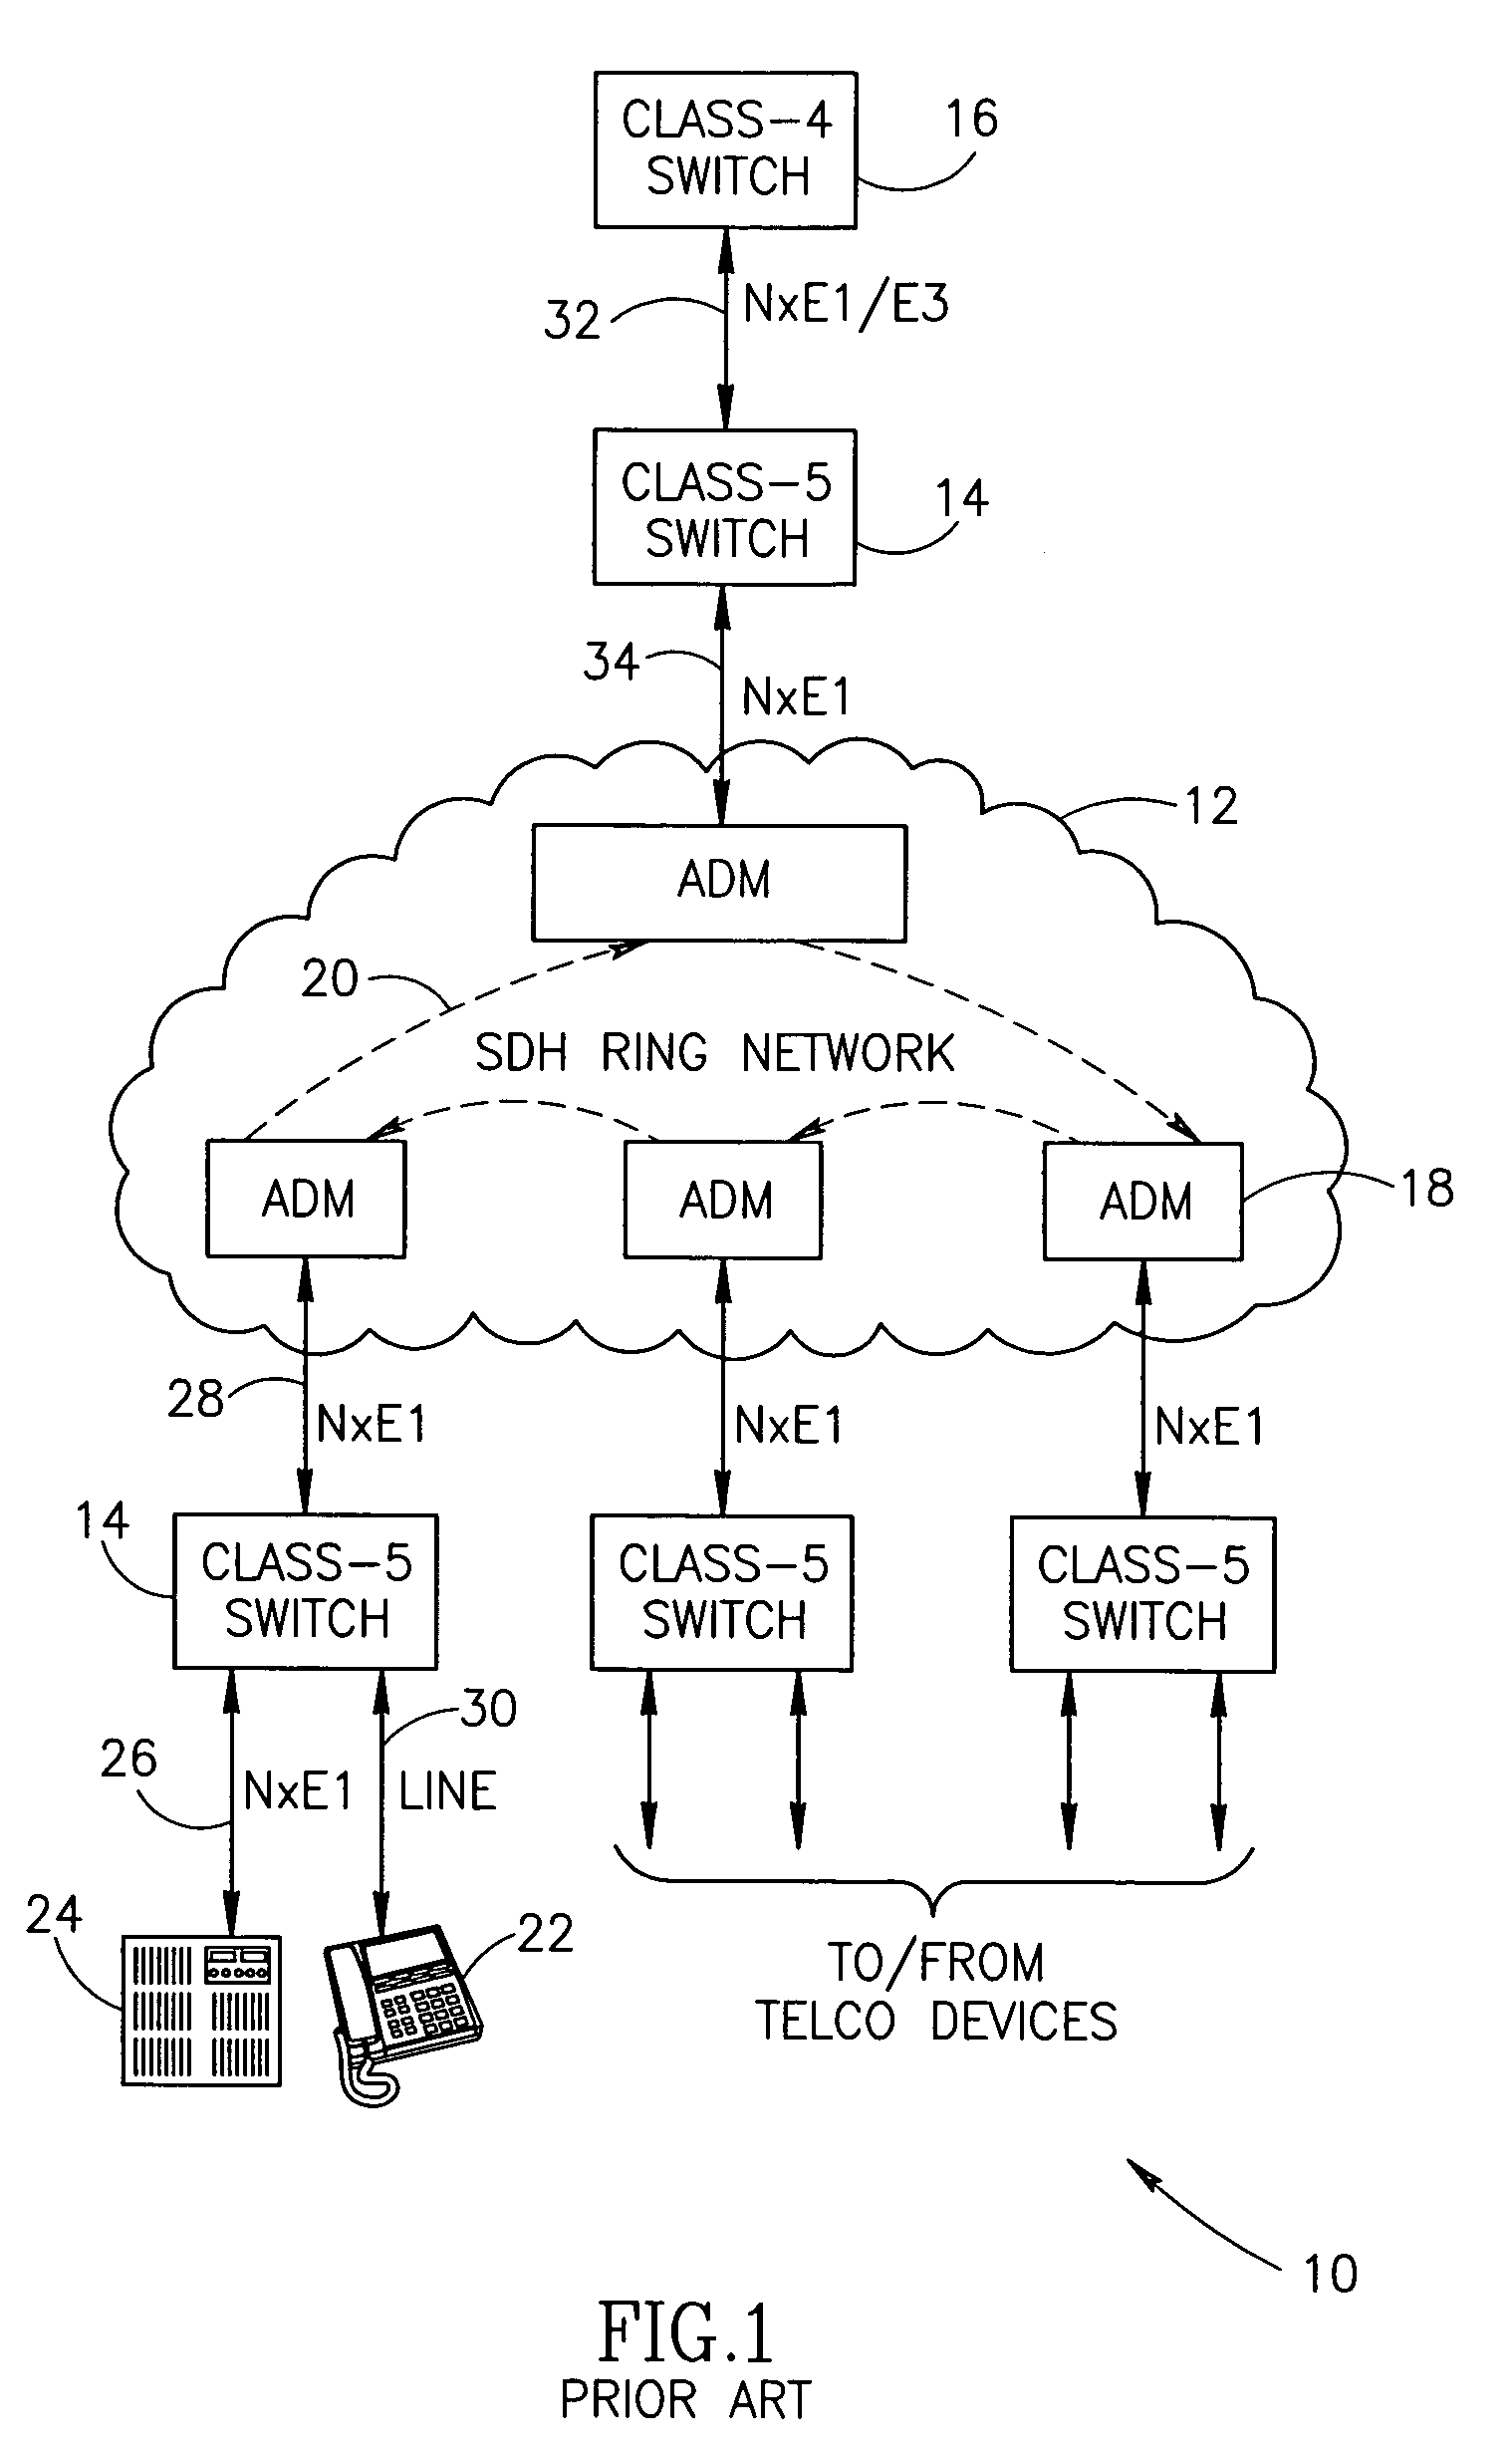 Facility for transporting TDM streams over an asynchronous ethernet network using internet protocol